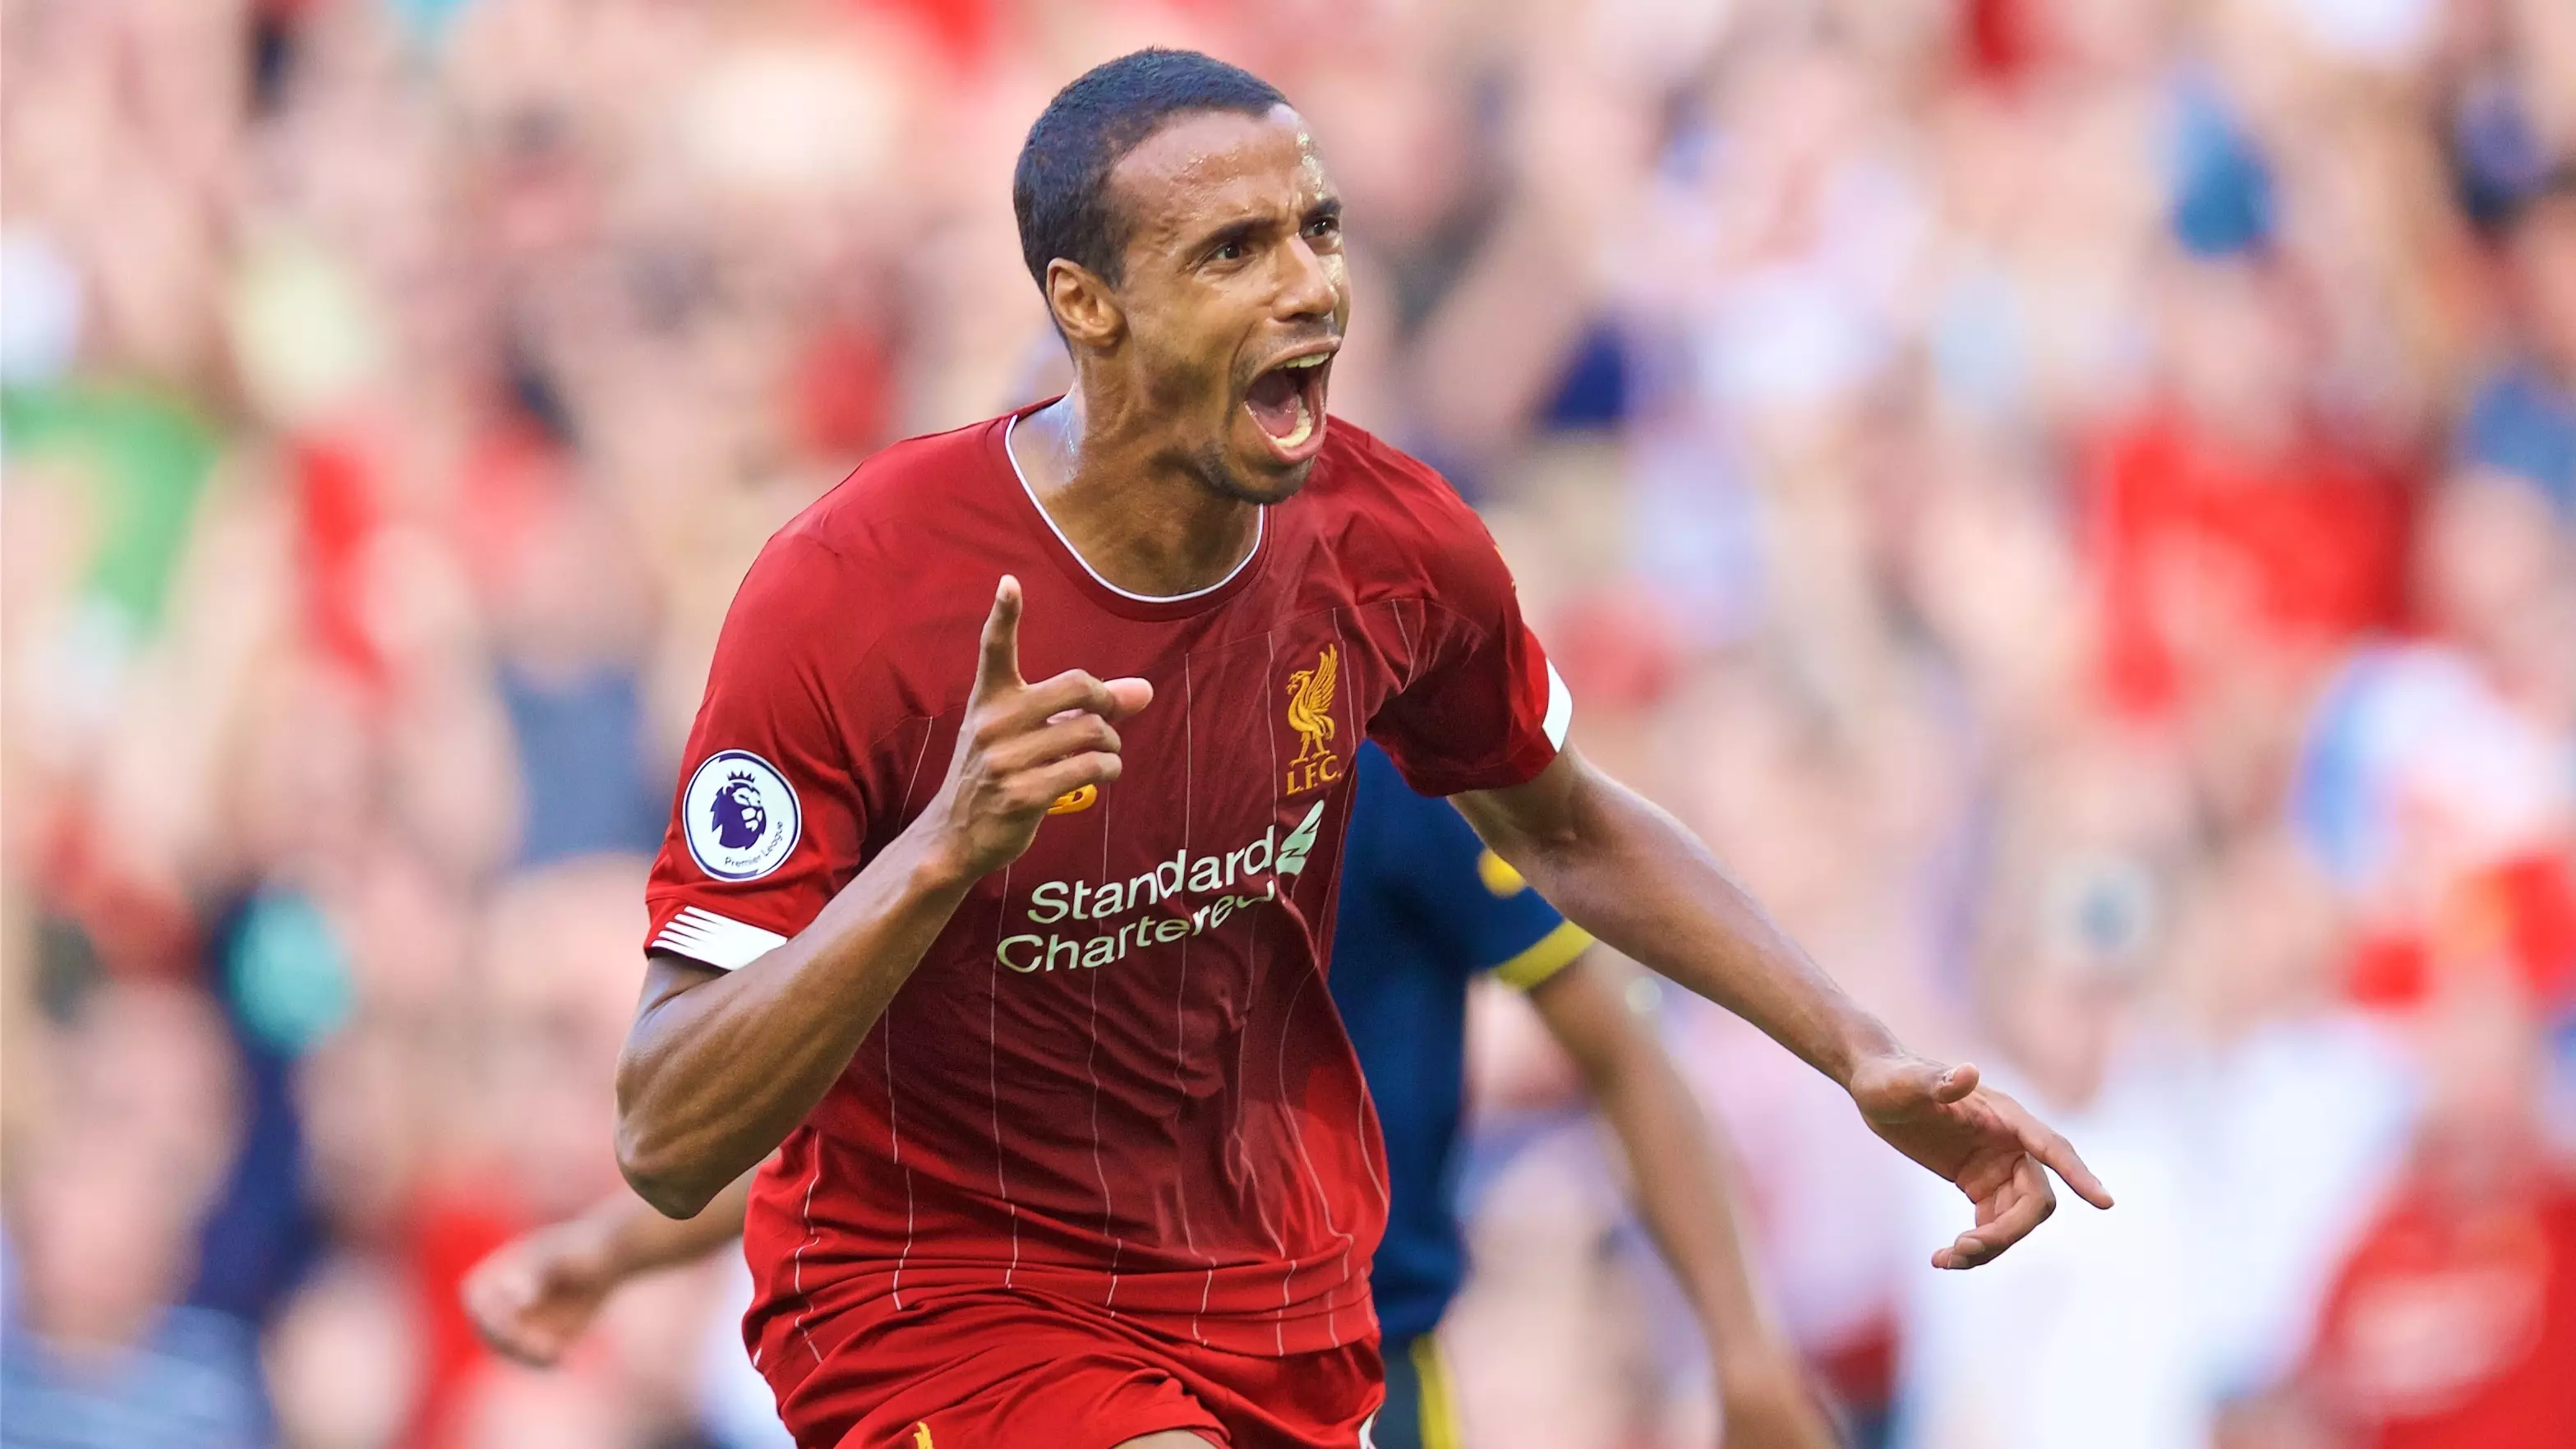 Liverpool Team News Vs Burnley: Adrian Continues In Goal While Joel Matip Expected To Keep Joe Gomez Out